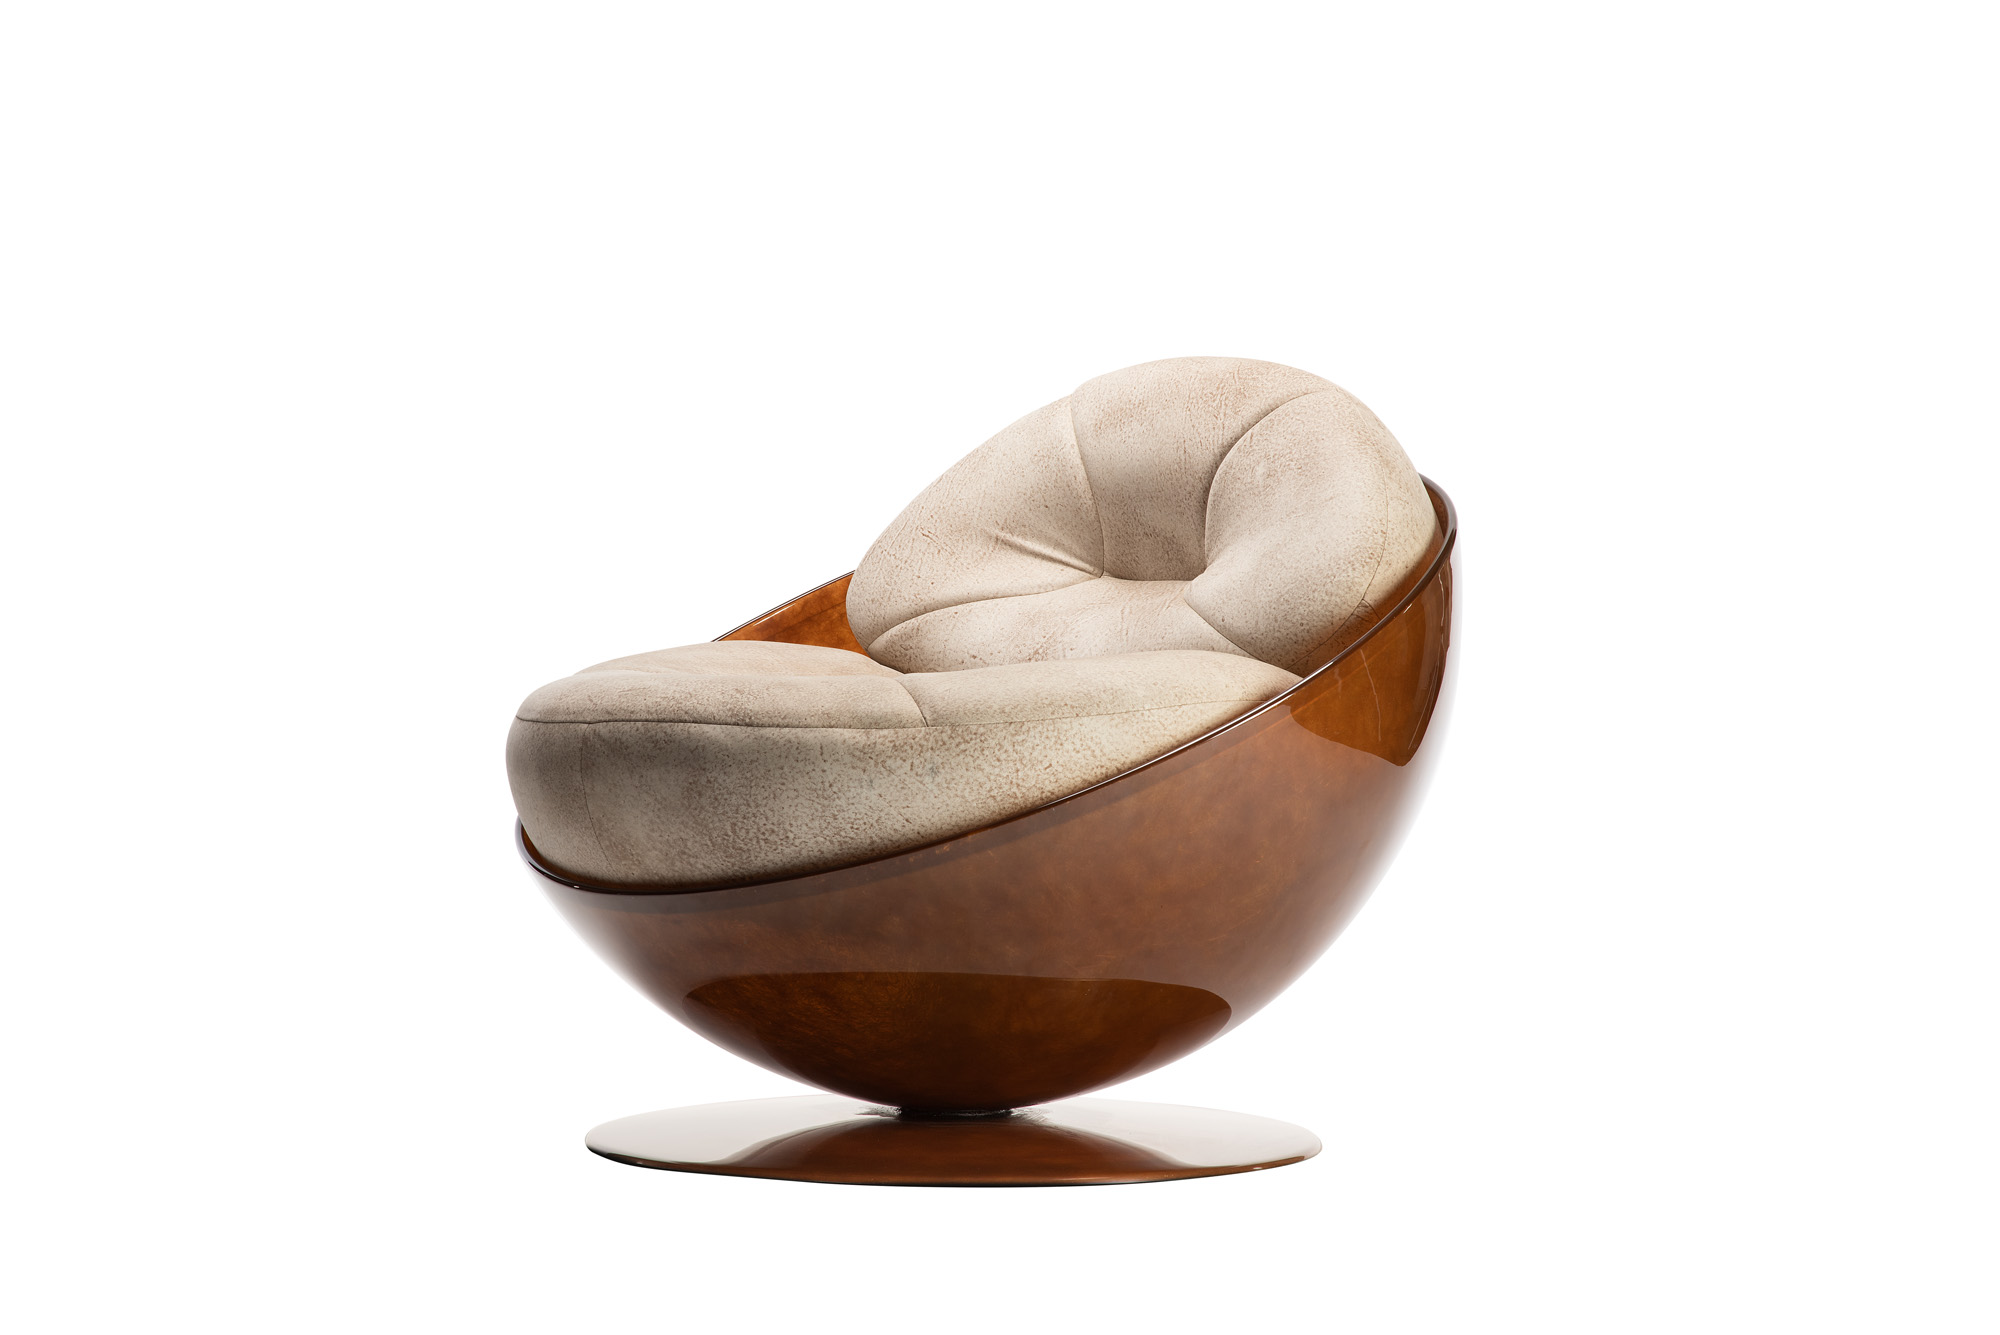 Egg chair by Espasso